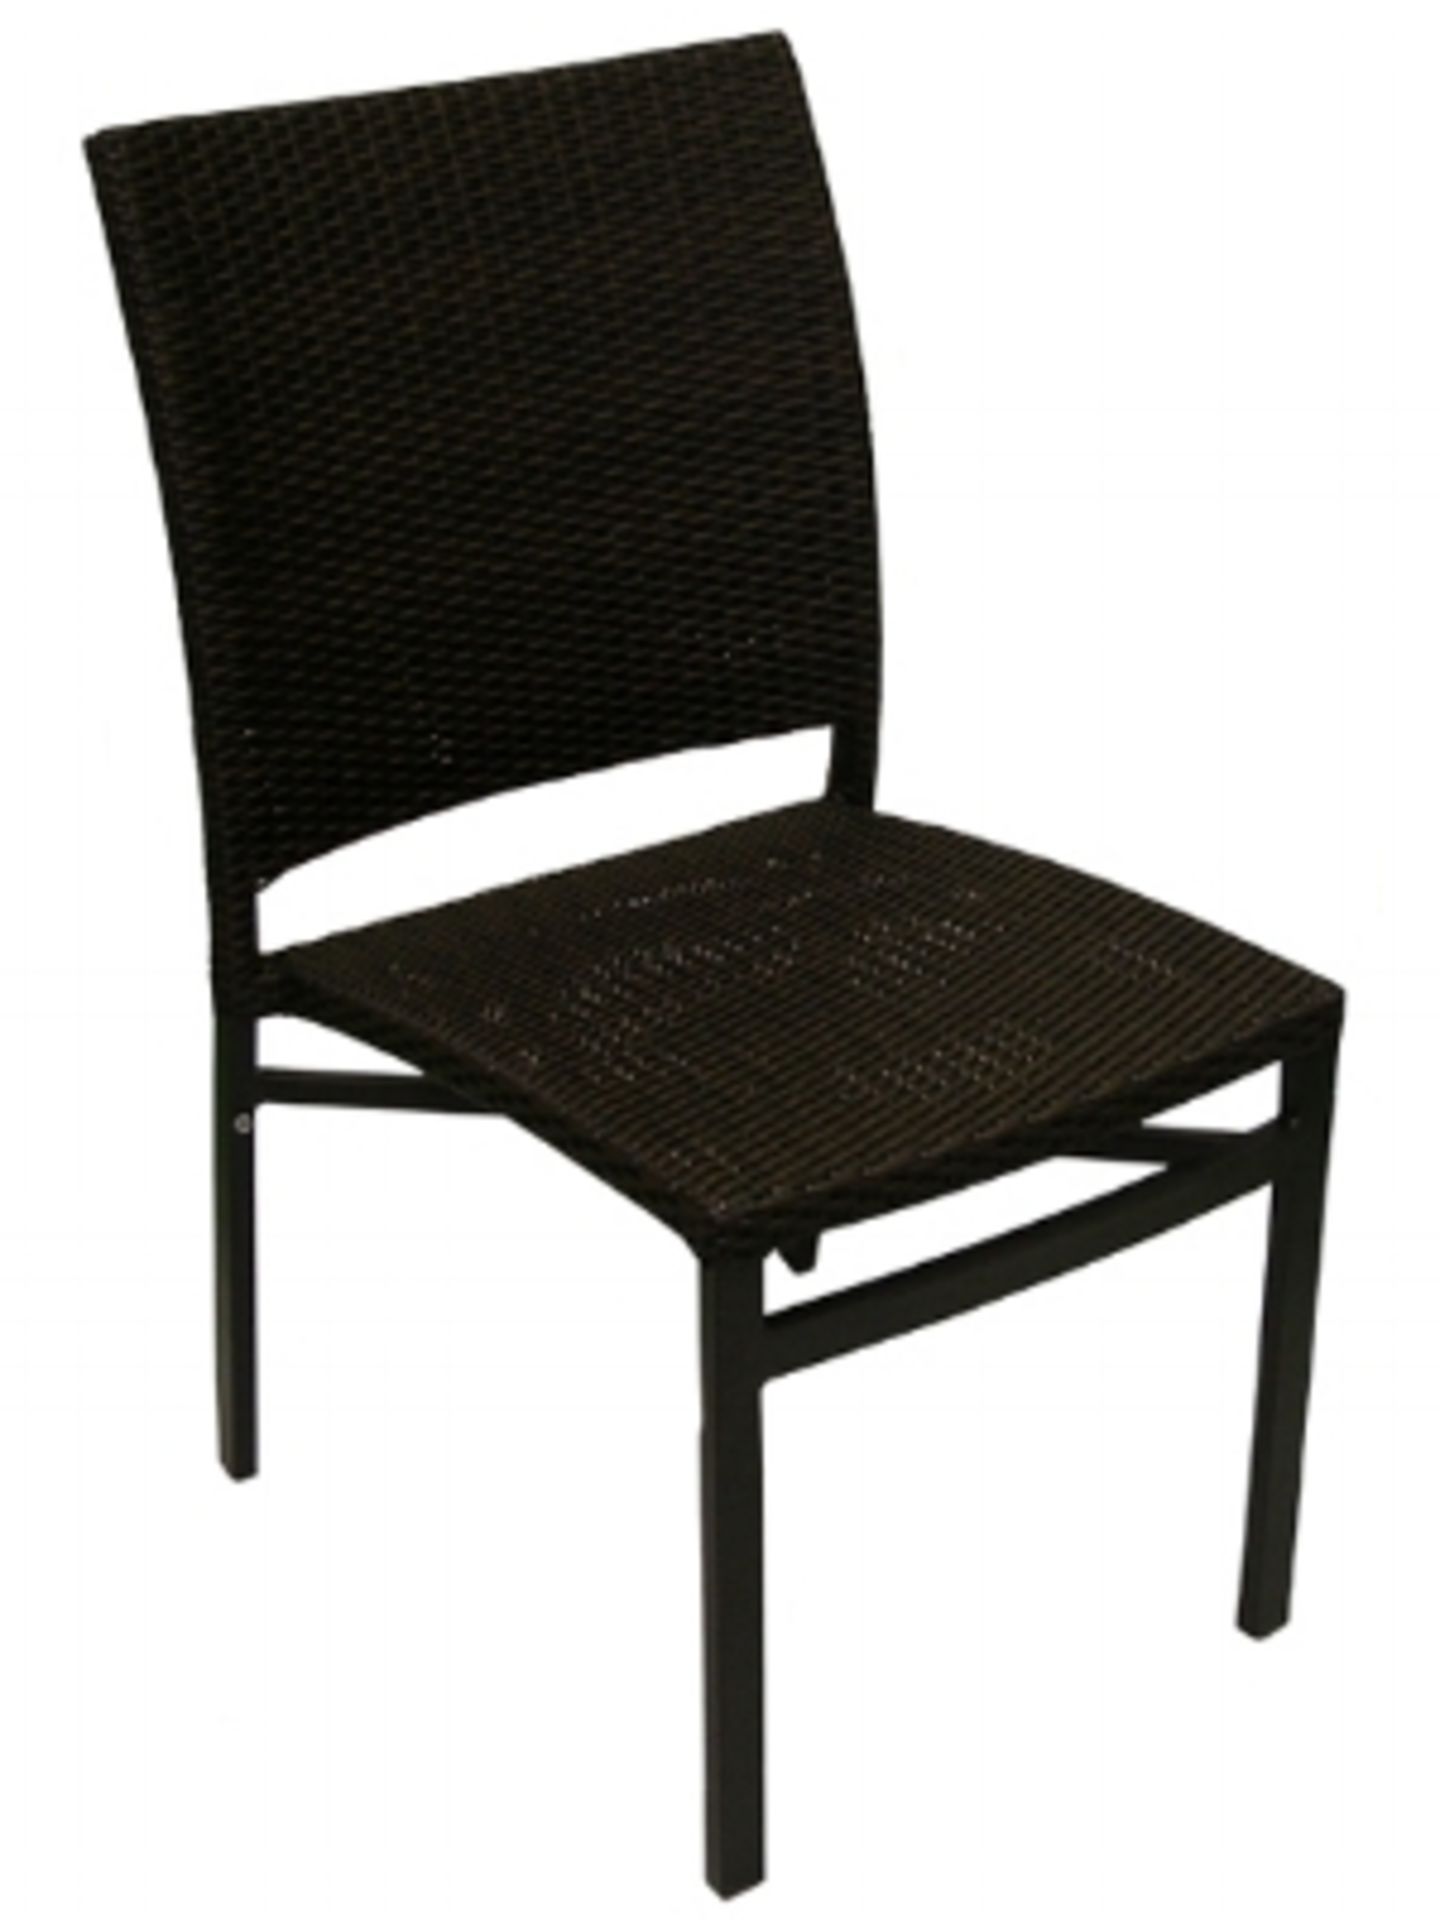 Oviedo Side Chair - Espresso. Powder coated tubular heavyweight aluminum frame with fade-resistant